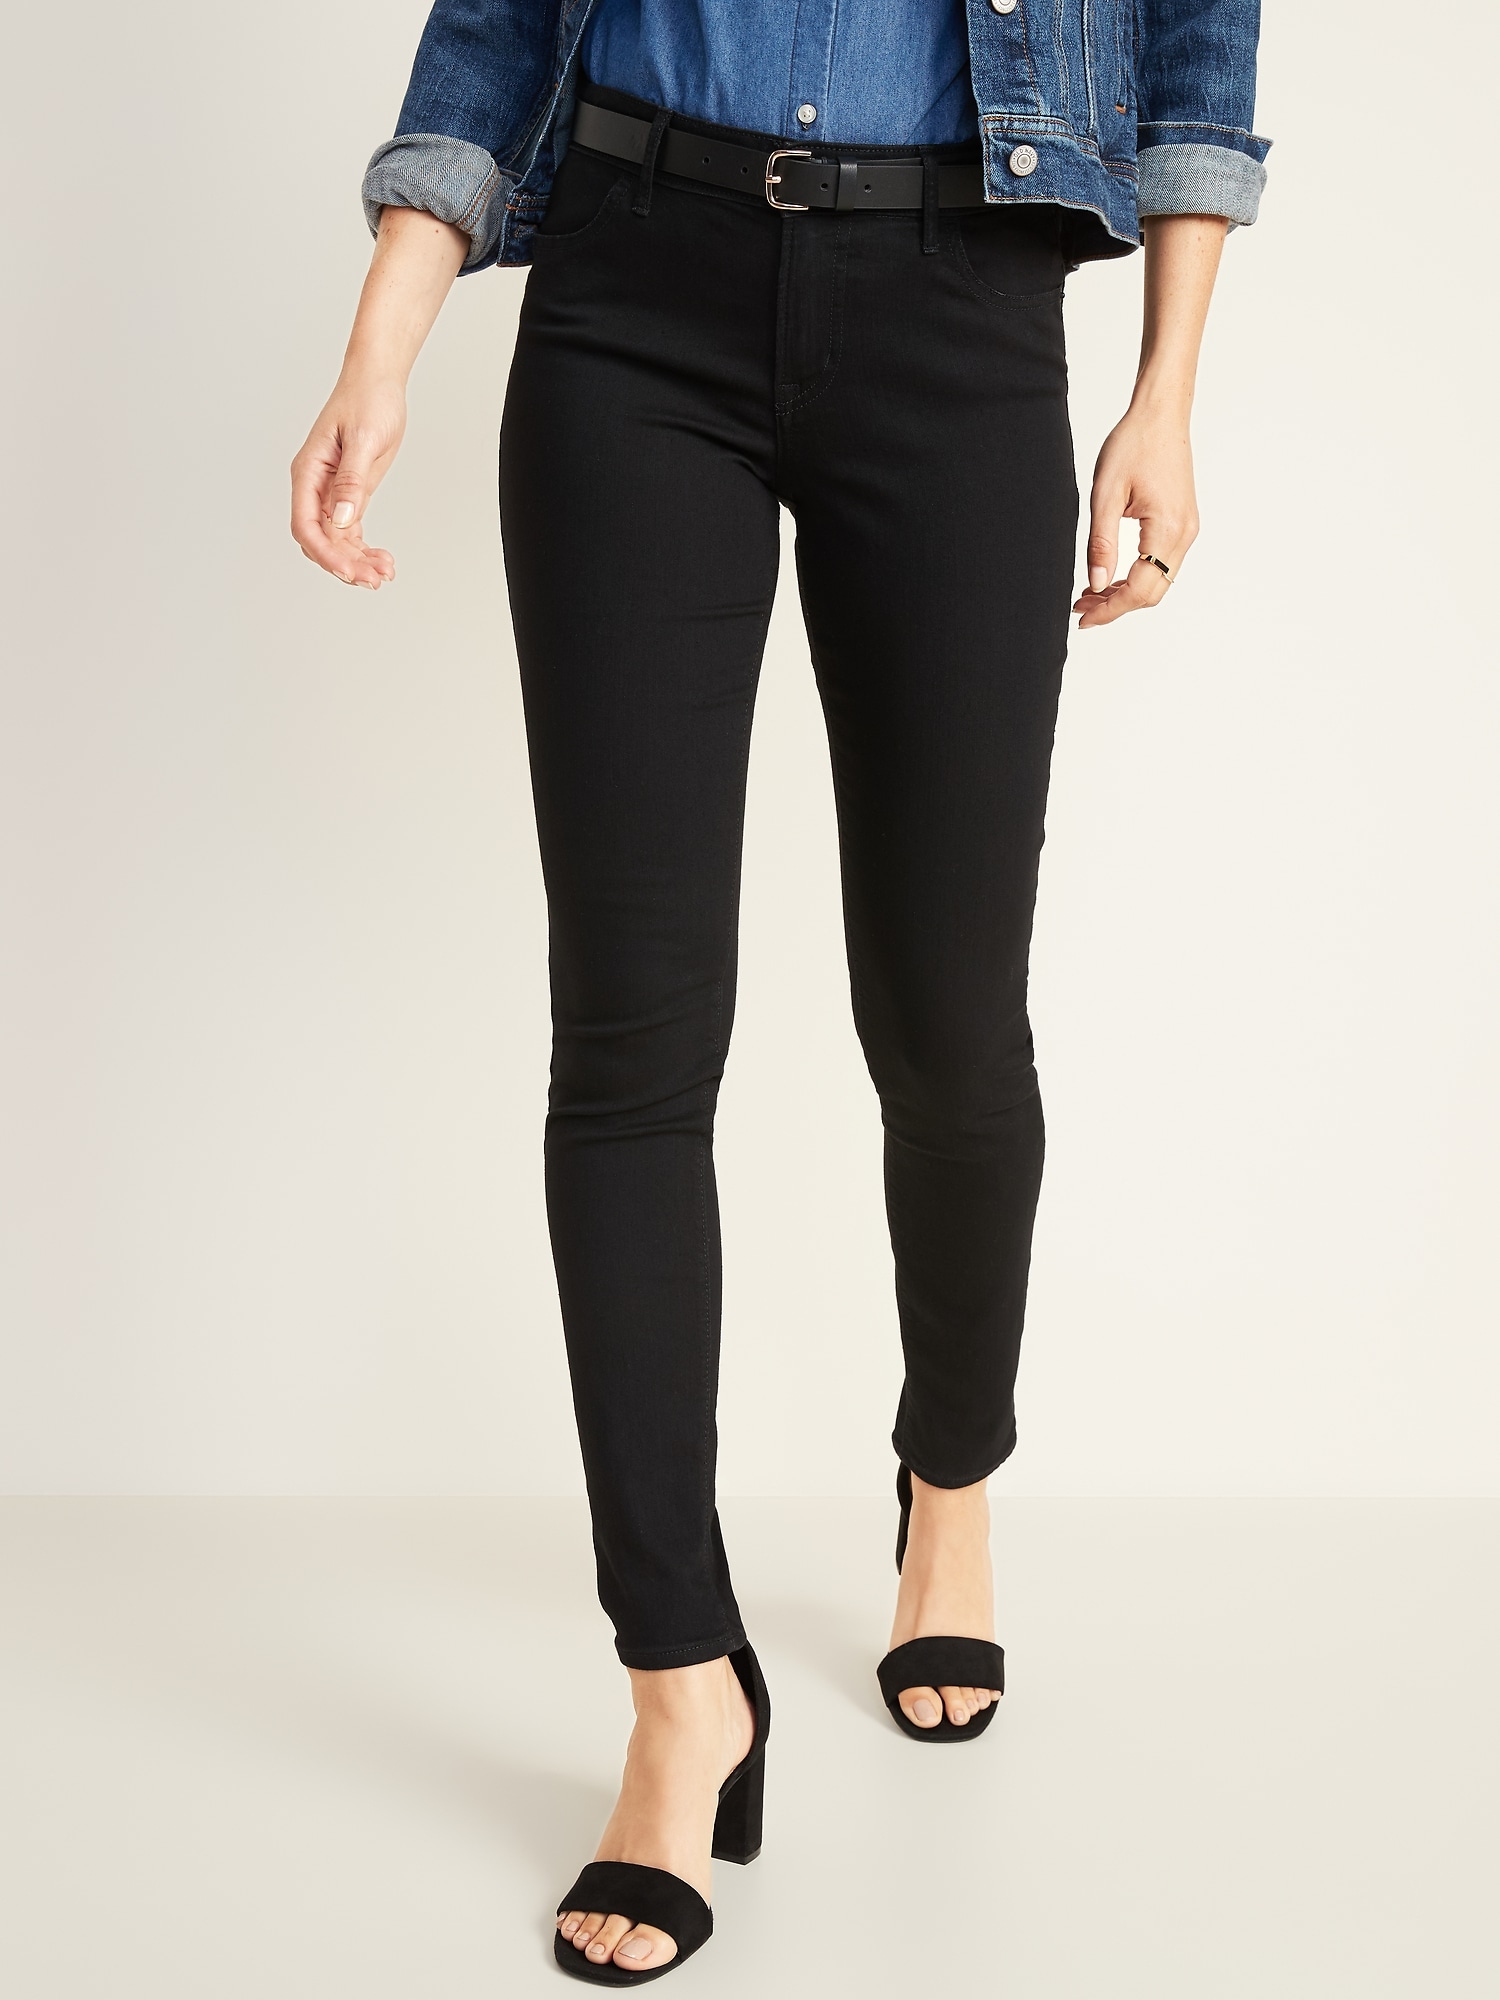 *Hot Deal* Mid-Rise Super Skinny Jeans for Women